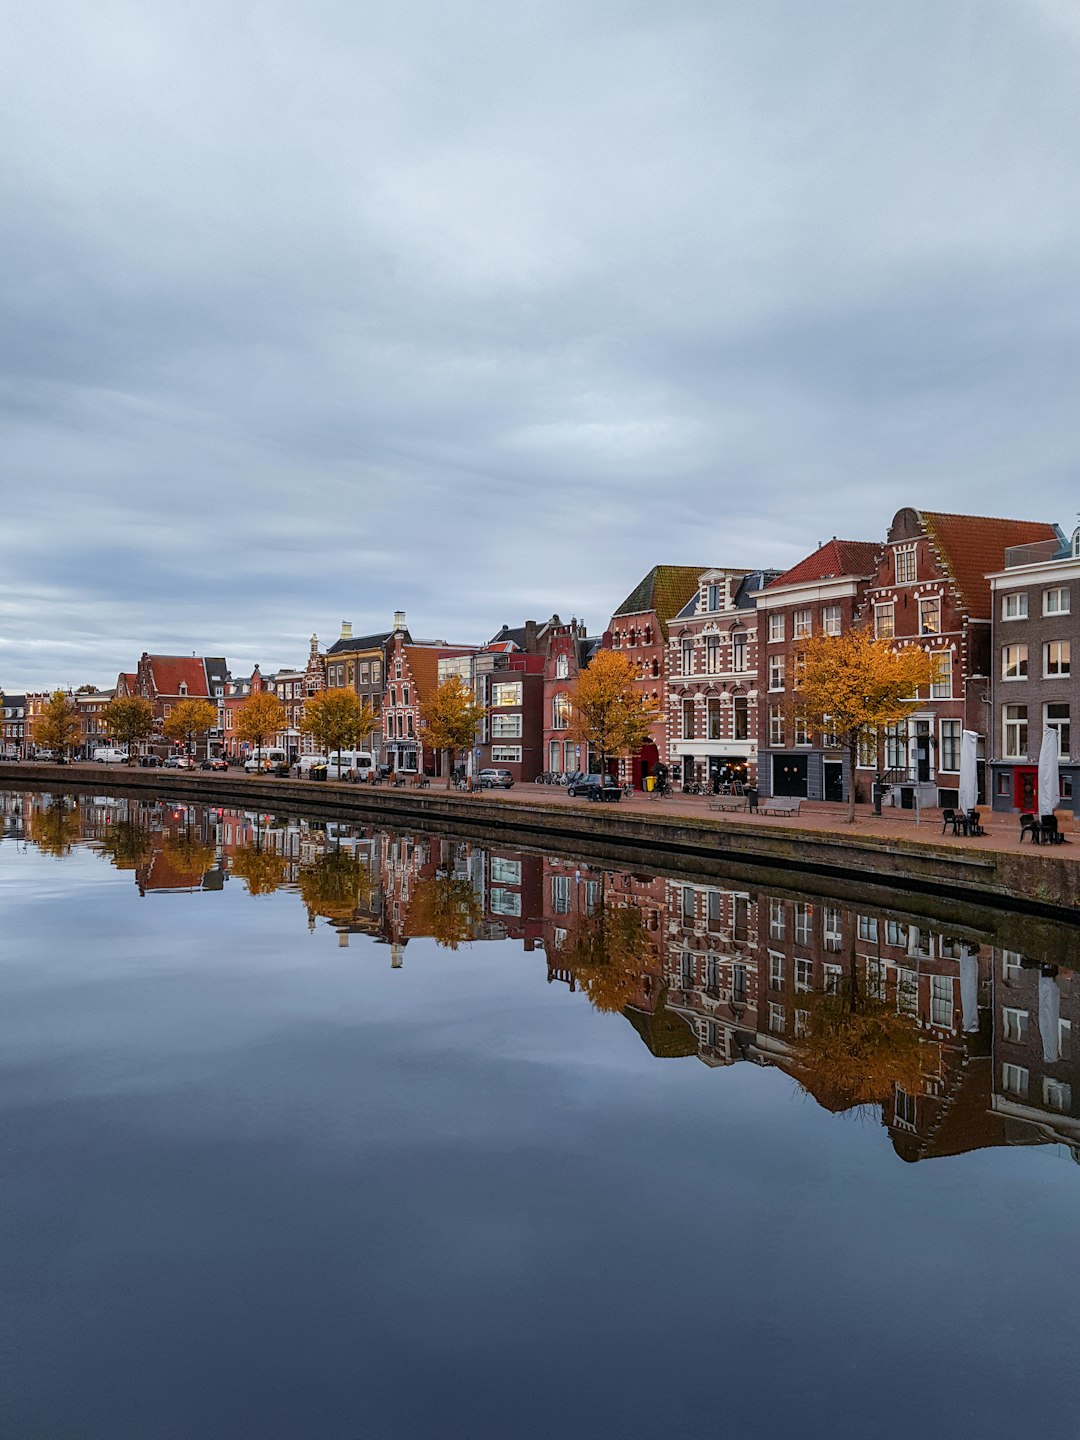 Travel Tips and Stories of Haarlem in Netherlands